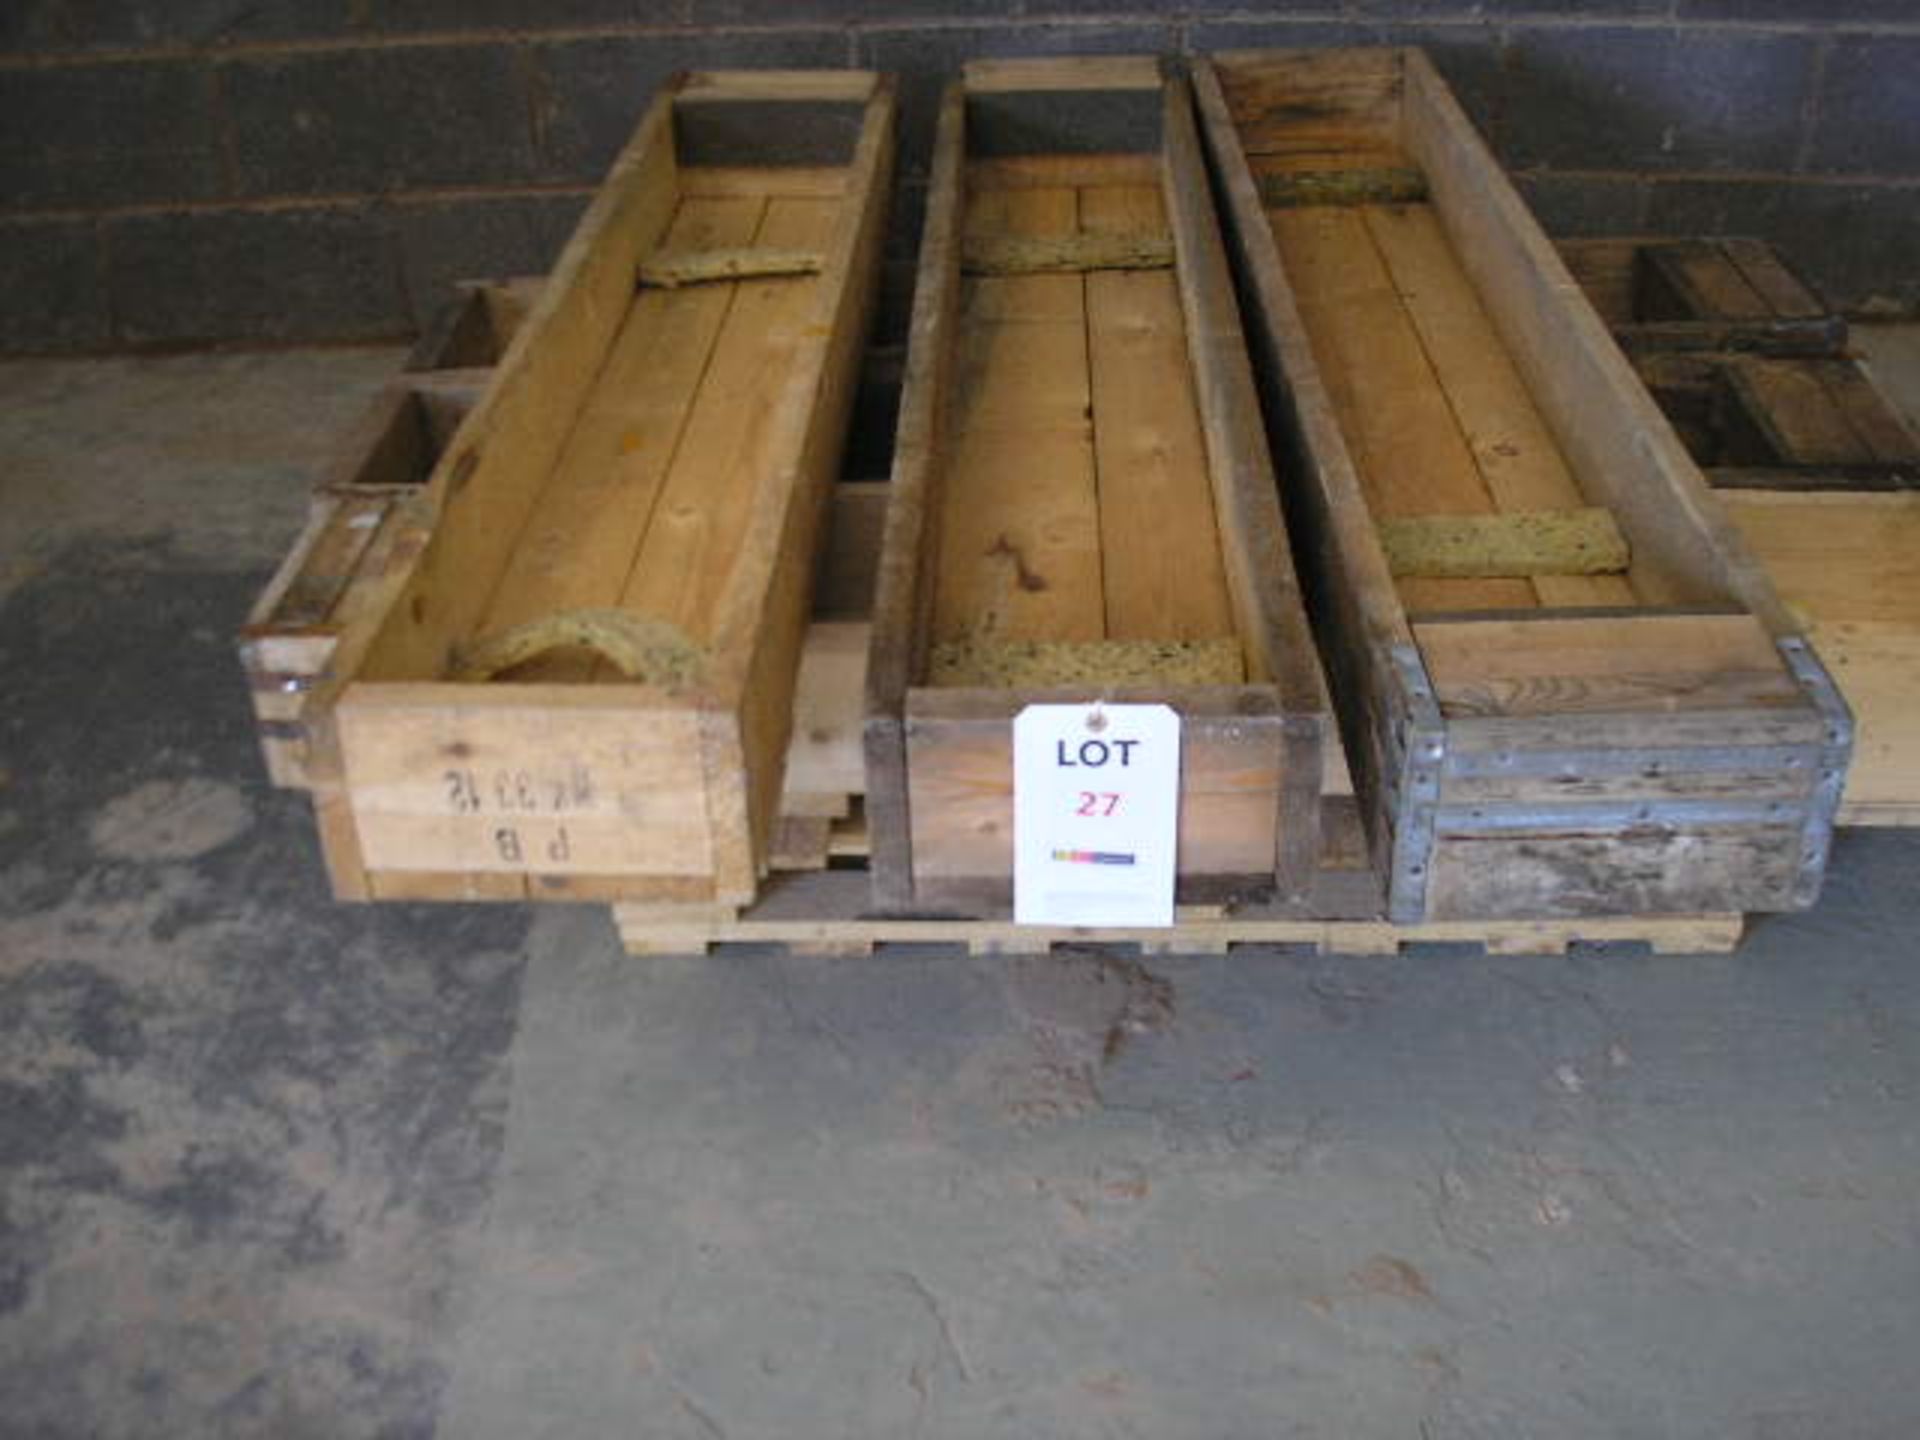 Approx. 70 open topped wood packing cases, 1,550mm x 290mm x 150mm
(Image for example only)